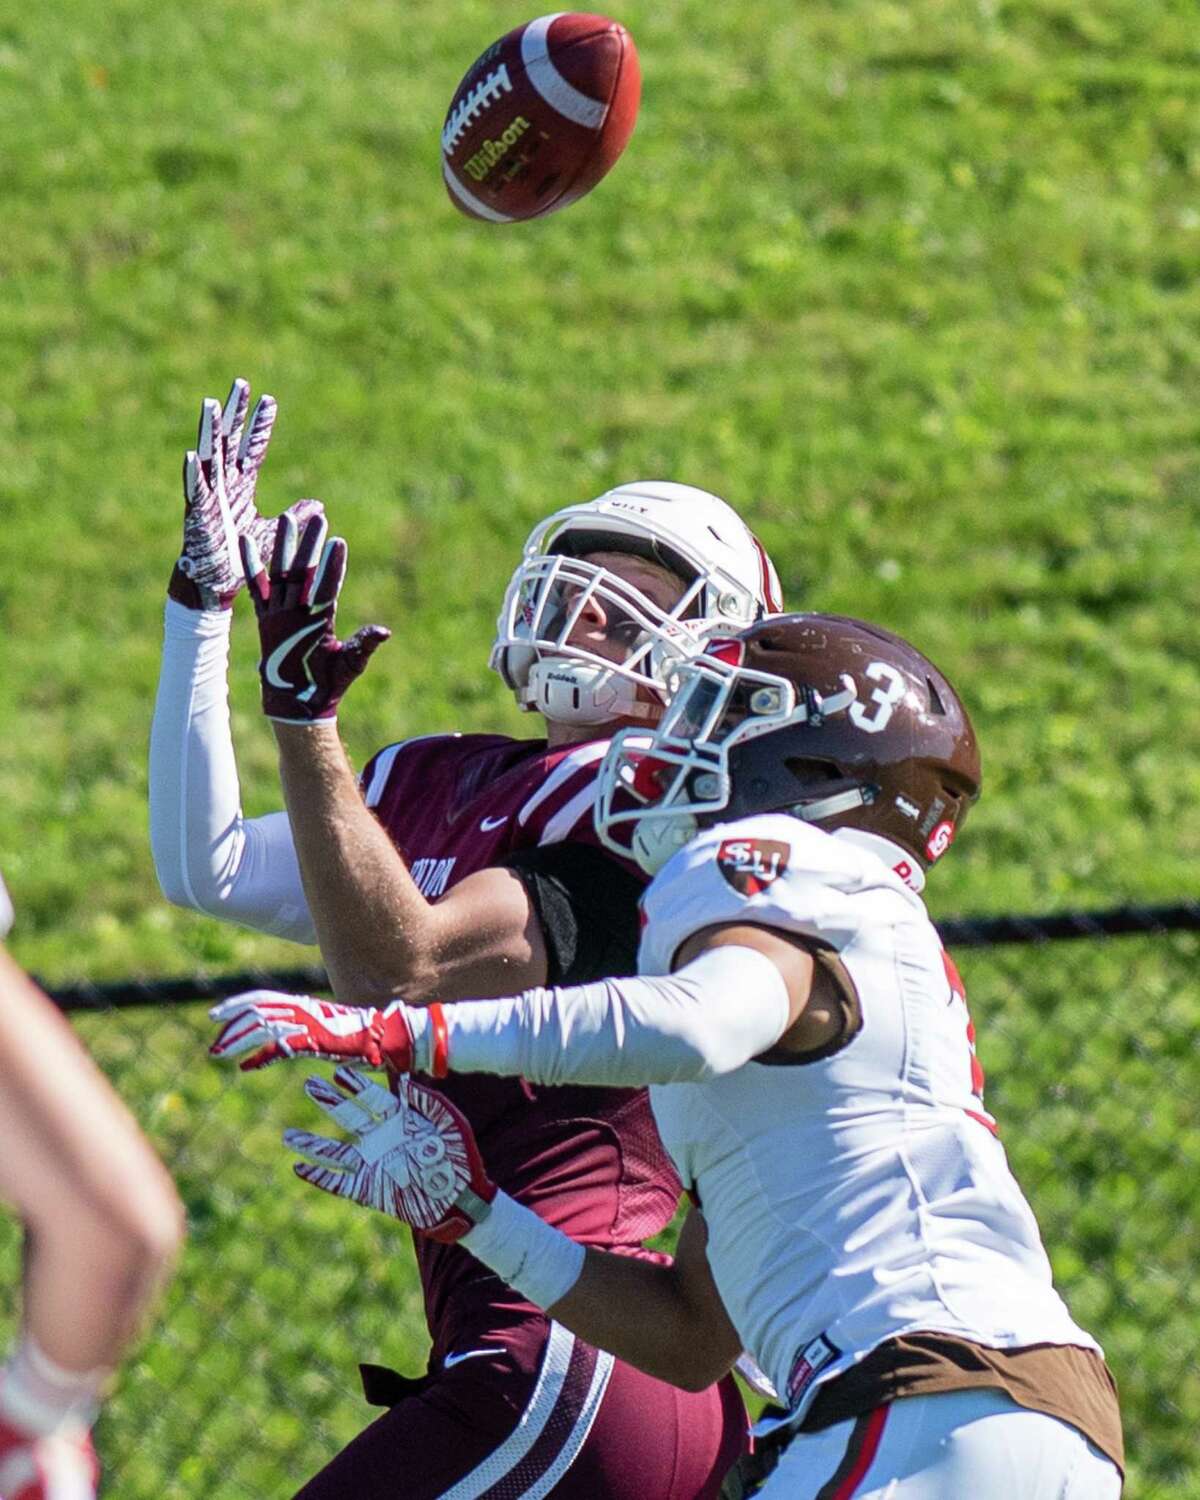 Union College receiver Will Sirmon makes a catch in front of St. Lawrence defensive back Rahmod Johnson during a game at Union College on Saturday, Oct. 19, 2019 (Jim Franco/Special to the Times Union.)